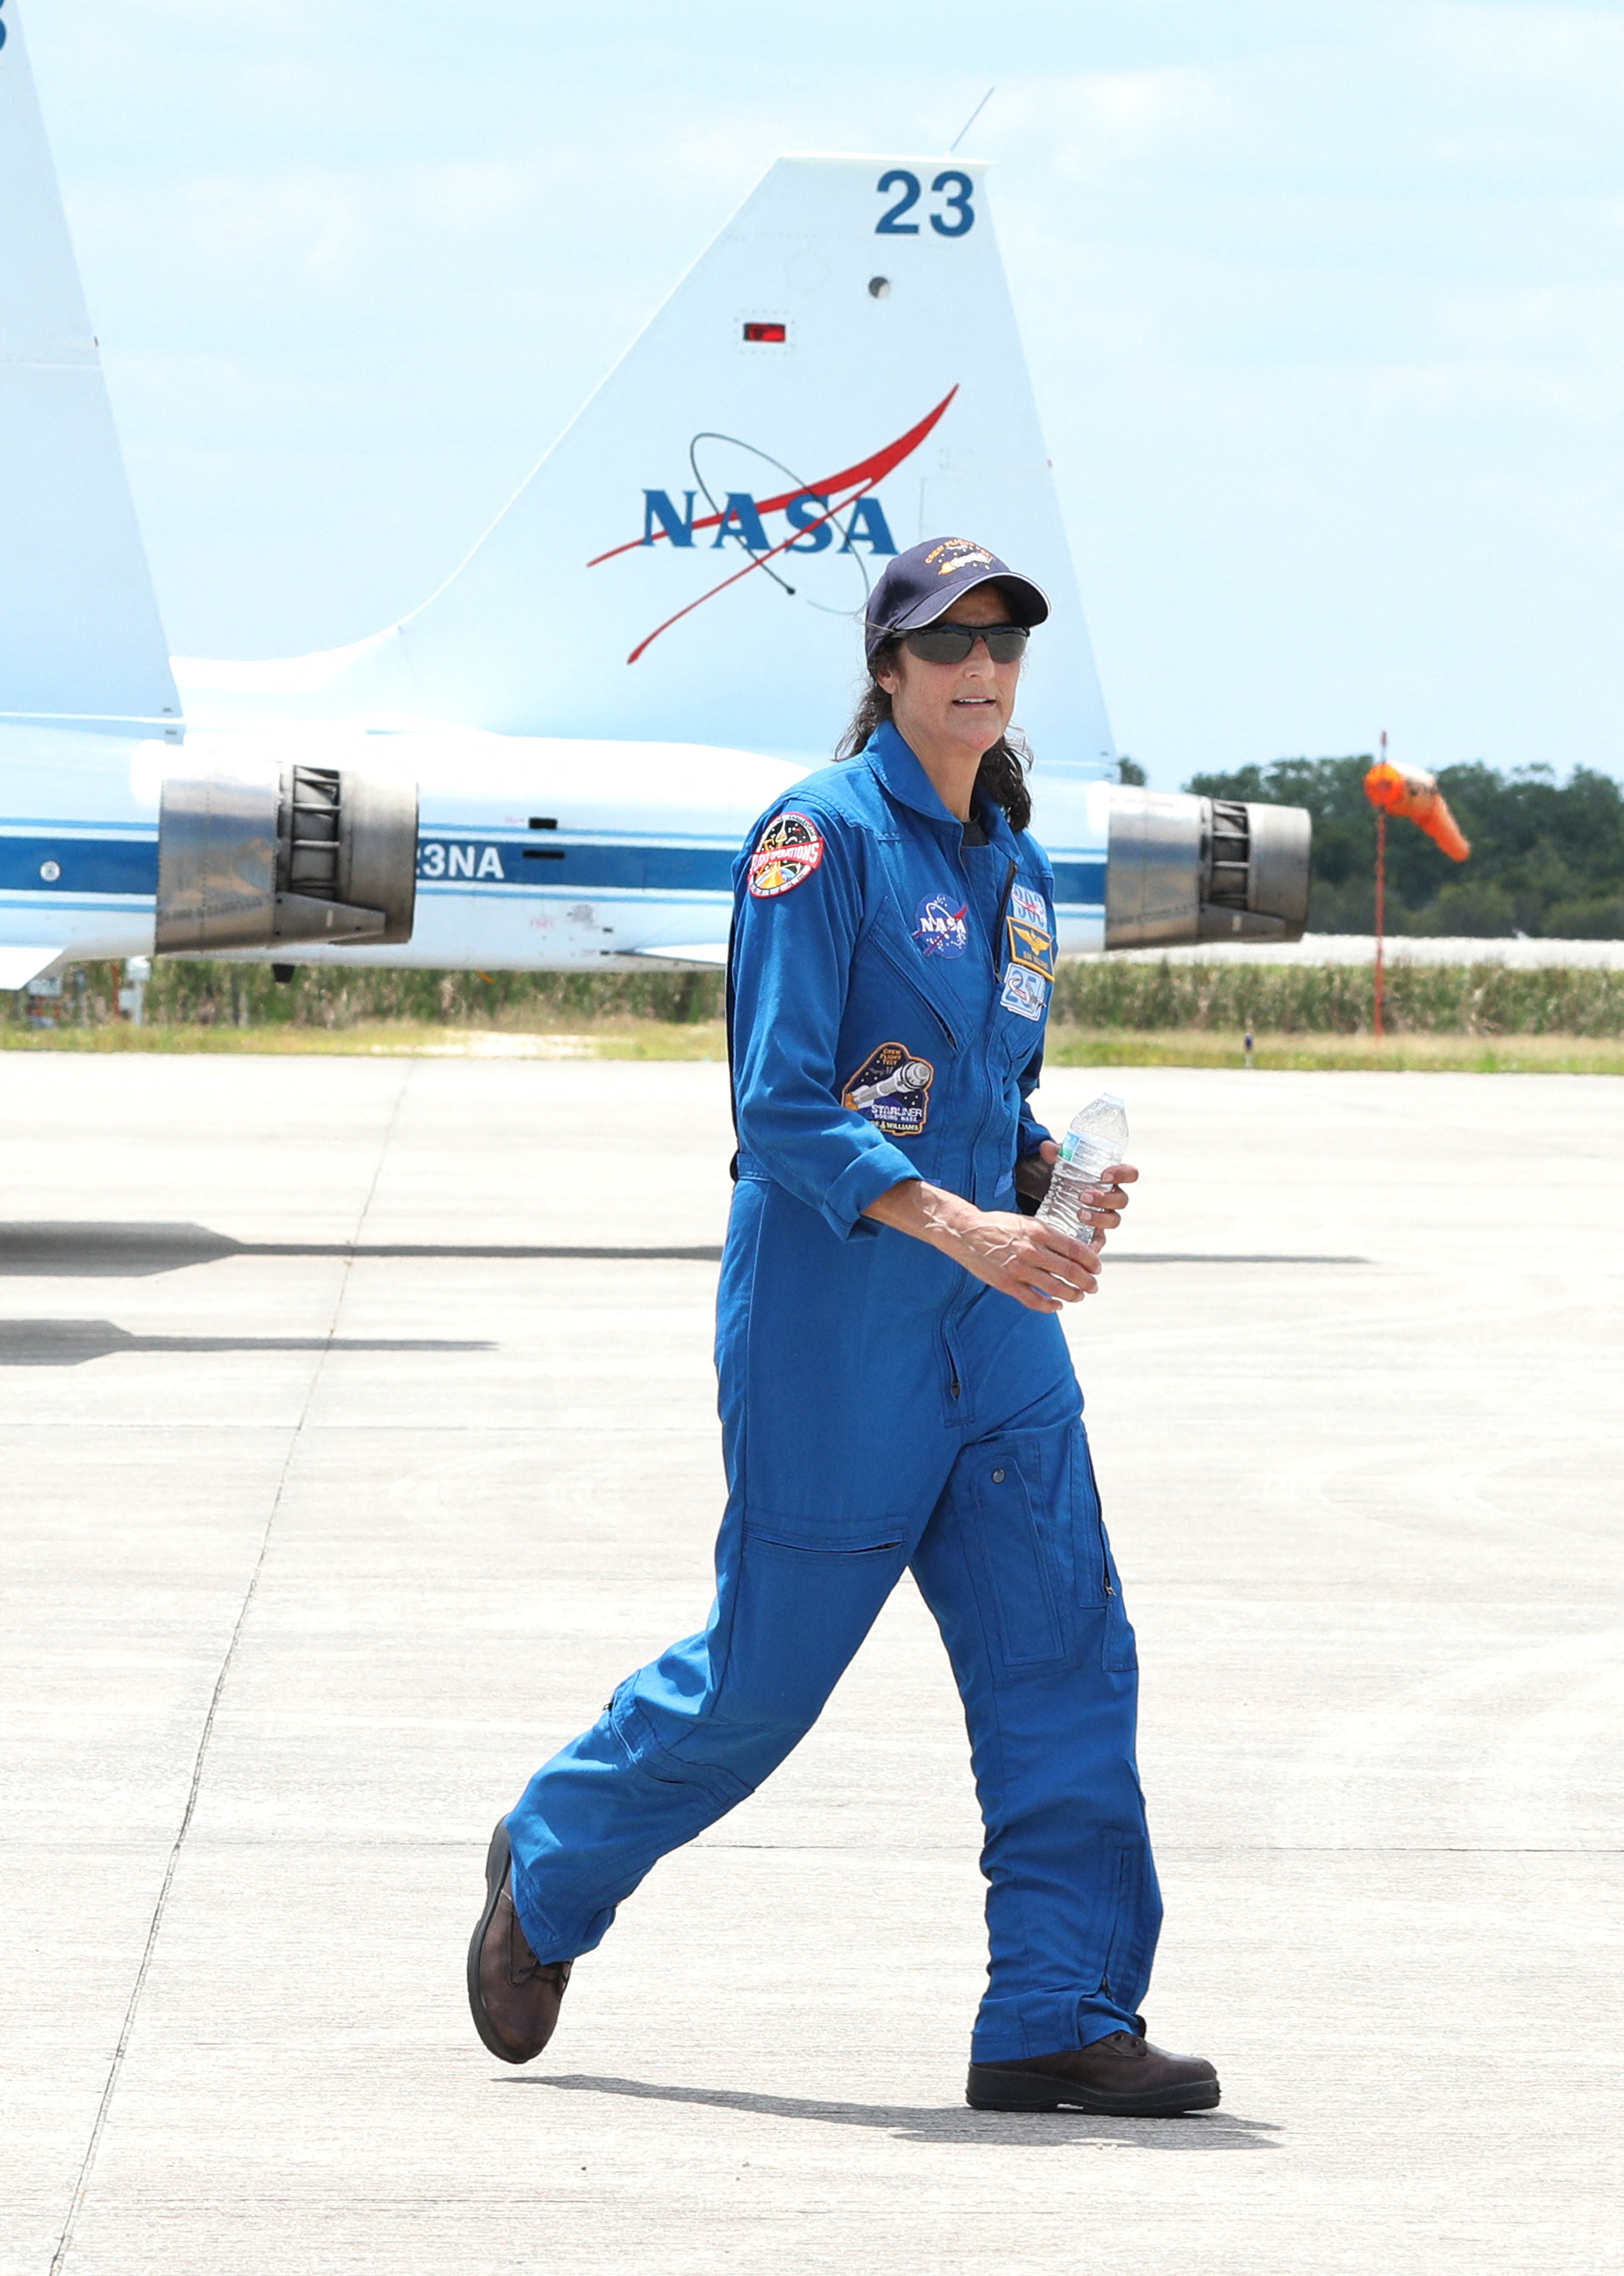 <p>NASA astronaut Suni Williams flew herself in a T-38 Talon jet to the Kennedy Space Center in Cape Canaveral, Florida, on April 25, 2024. </p><p>She's there to next fly on the Crew Flight Test-1 (CFT-1) mission to the International Space Station, set for May 6. </p><p>A United Launch Alliance (ULA) Atlas V rocket will ferry the Boeing CST-100 Starliner capsule on its historic first crewed flight of the new spacecraft. </p><p>Williams will also be one of the first humans launched into space aboard an Atlas V rocket.</p>